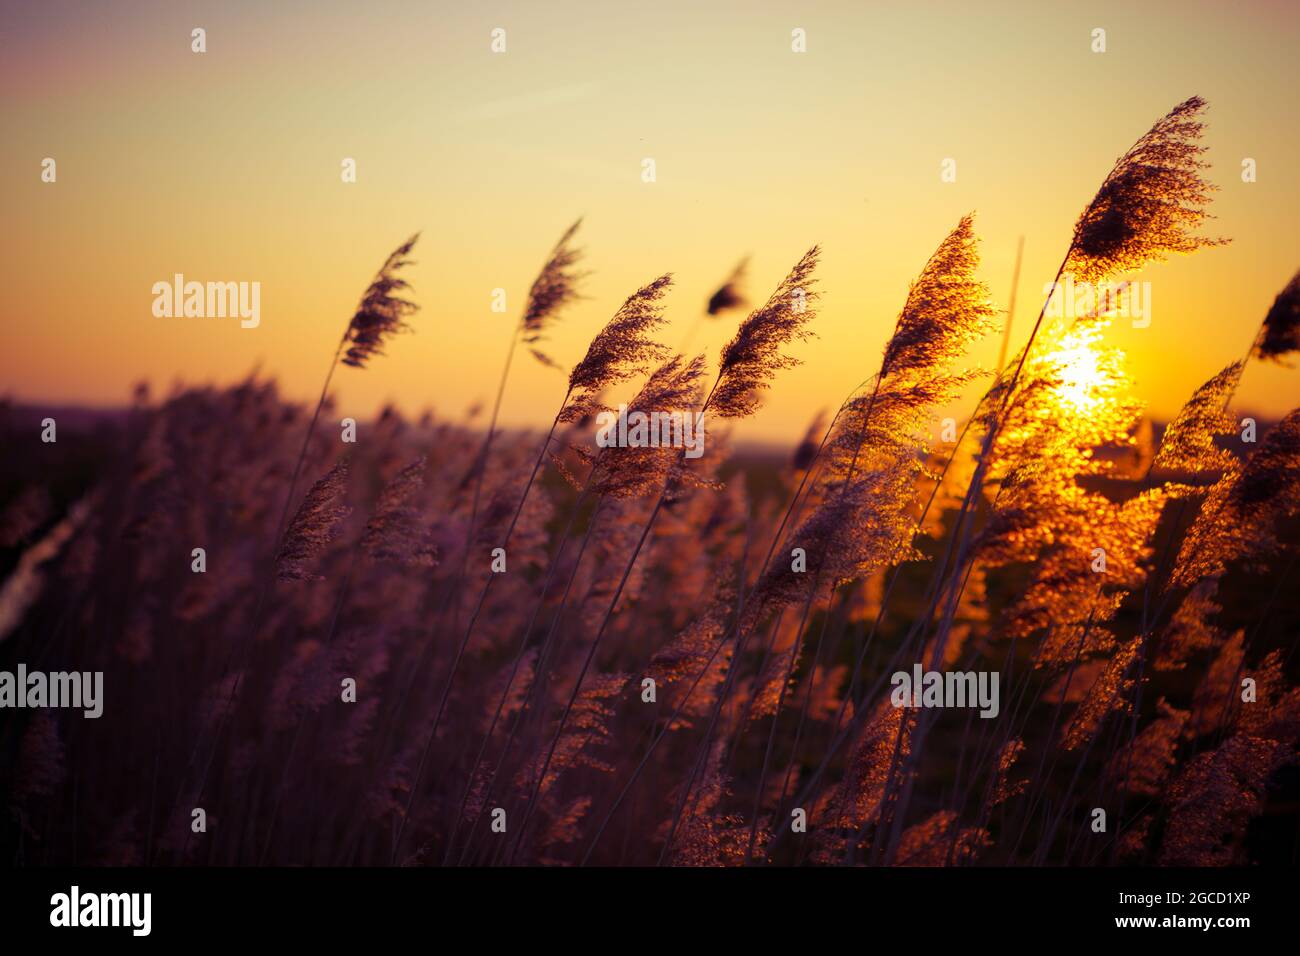 Sunset in the reeds Stock Photo